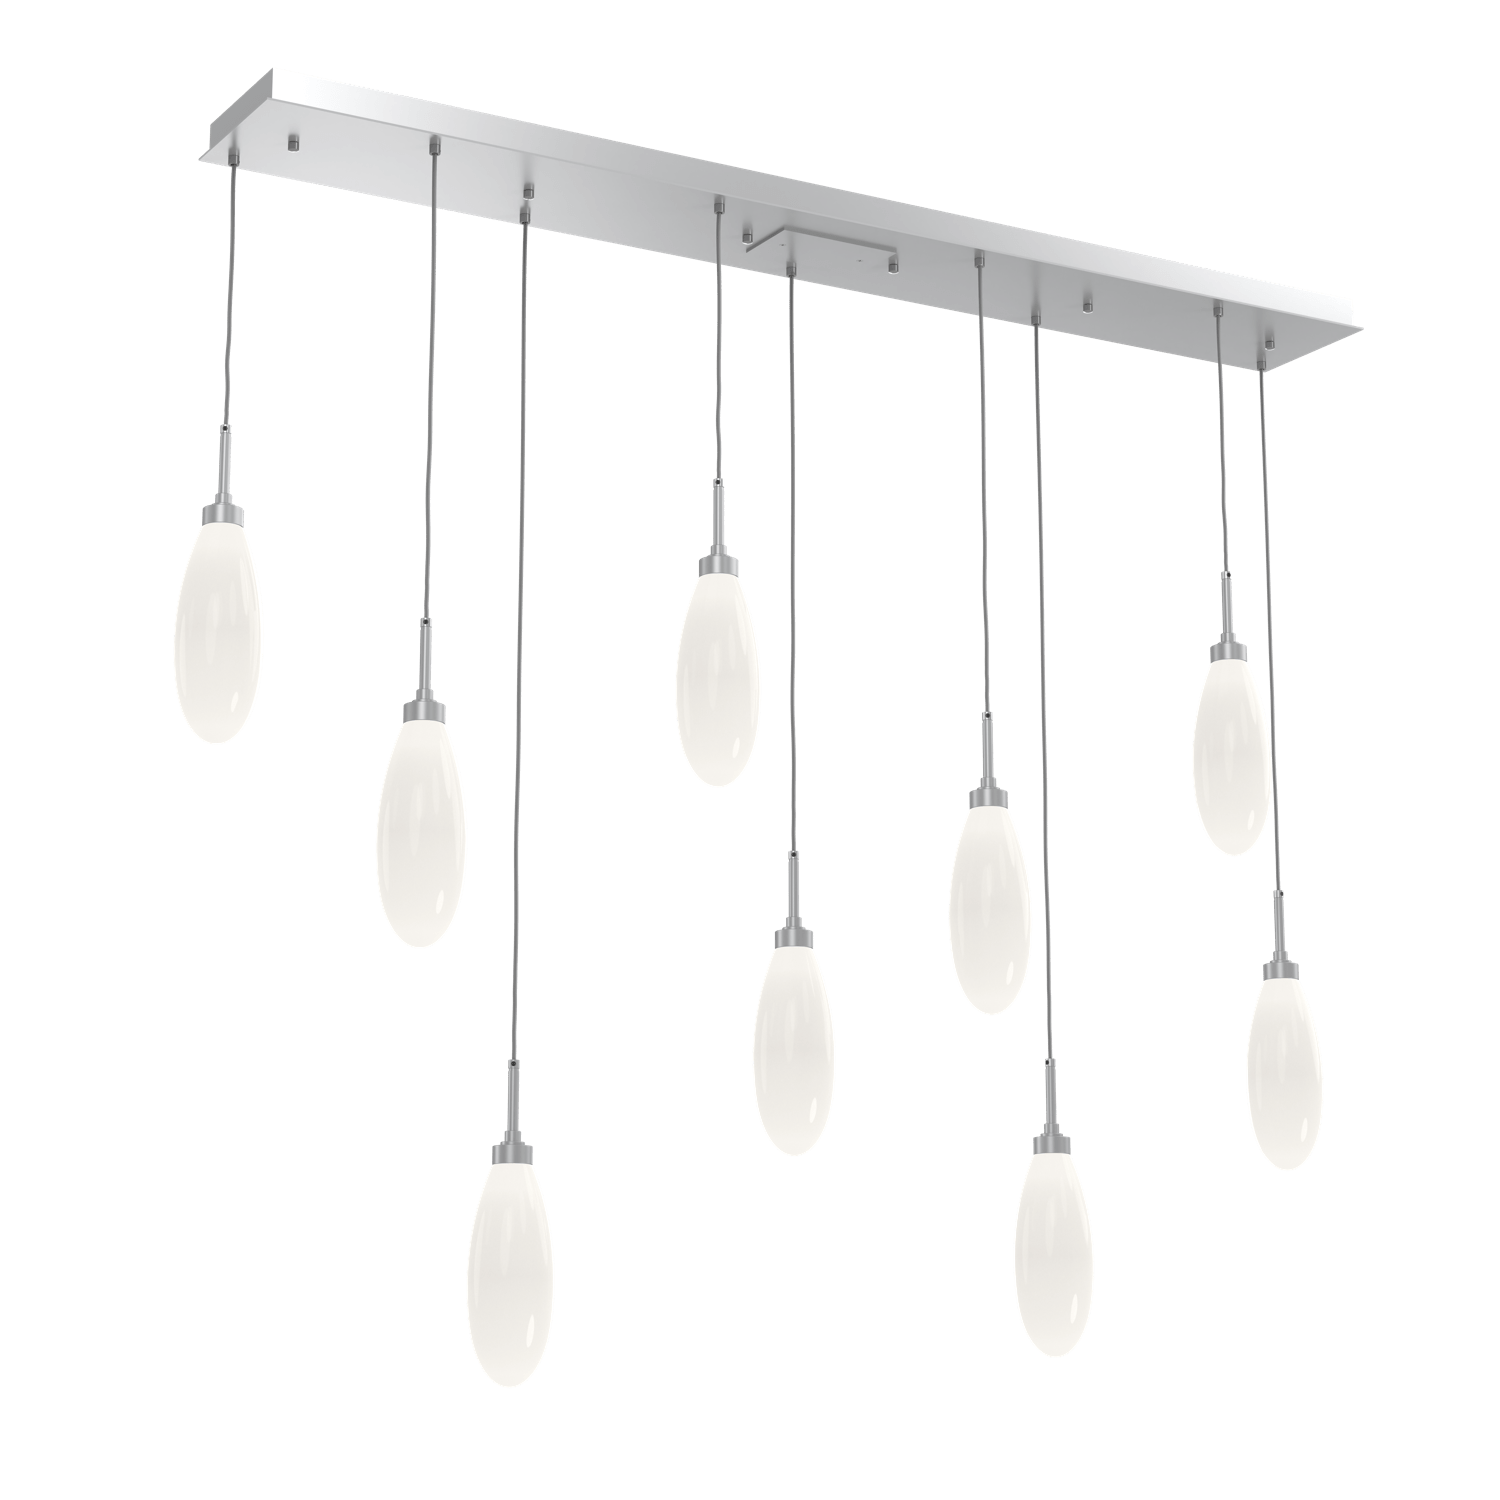 PLB0071-09-CS-WL-LL-Hammerton-Studio-Fiori-9-light-linear-pendant-chandelier-with-classic-silver-finish-and-opal-white-glass-shades-and-LED-lamping